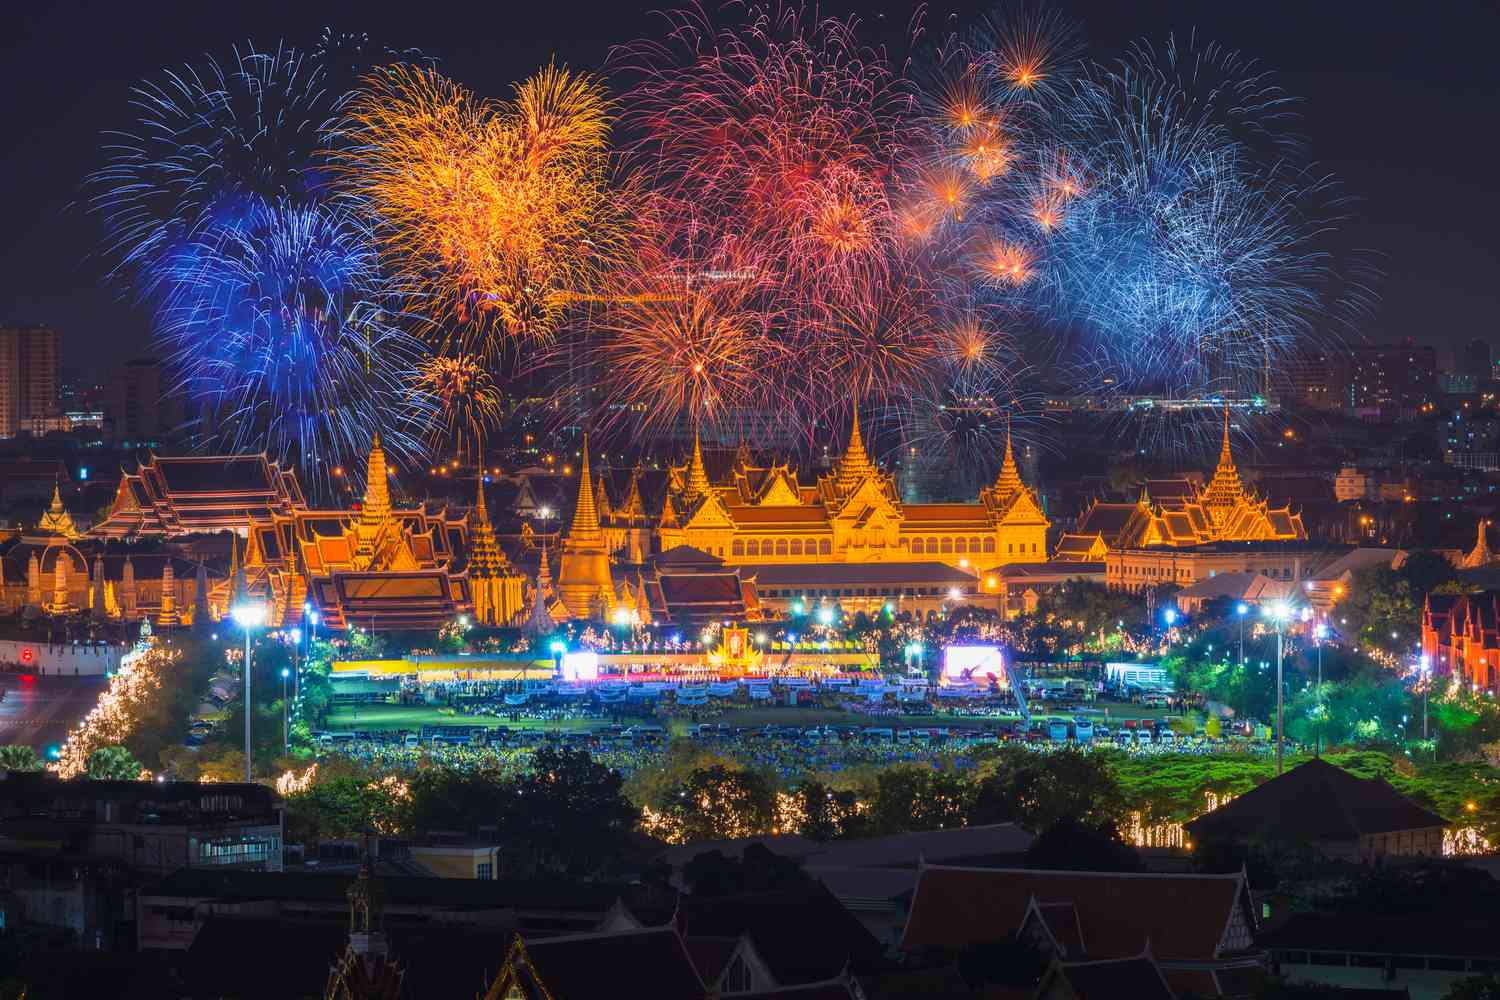 grand palace at twilight in bangkok along thai father s day our king birthday festival thailand with fire work 614291606 5c51c65346e0fb00014c39fe 1